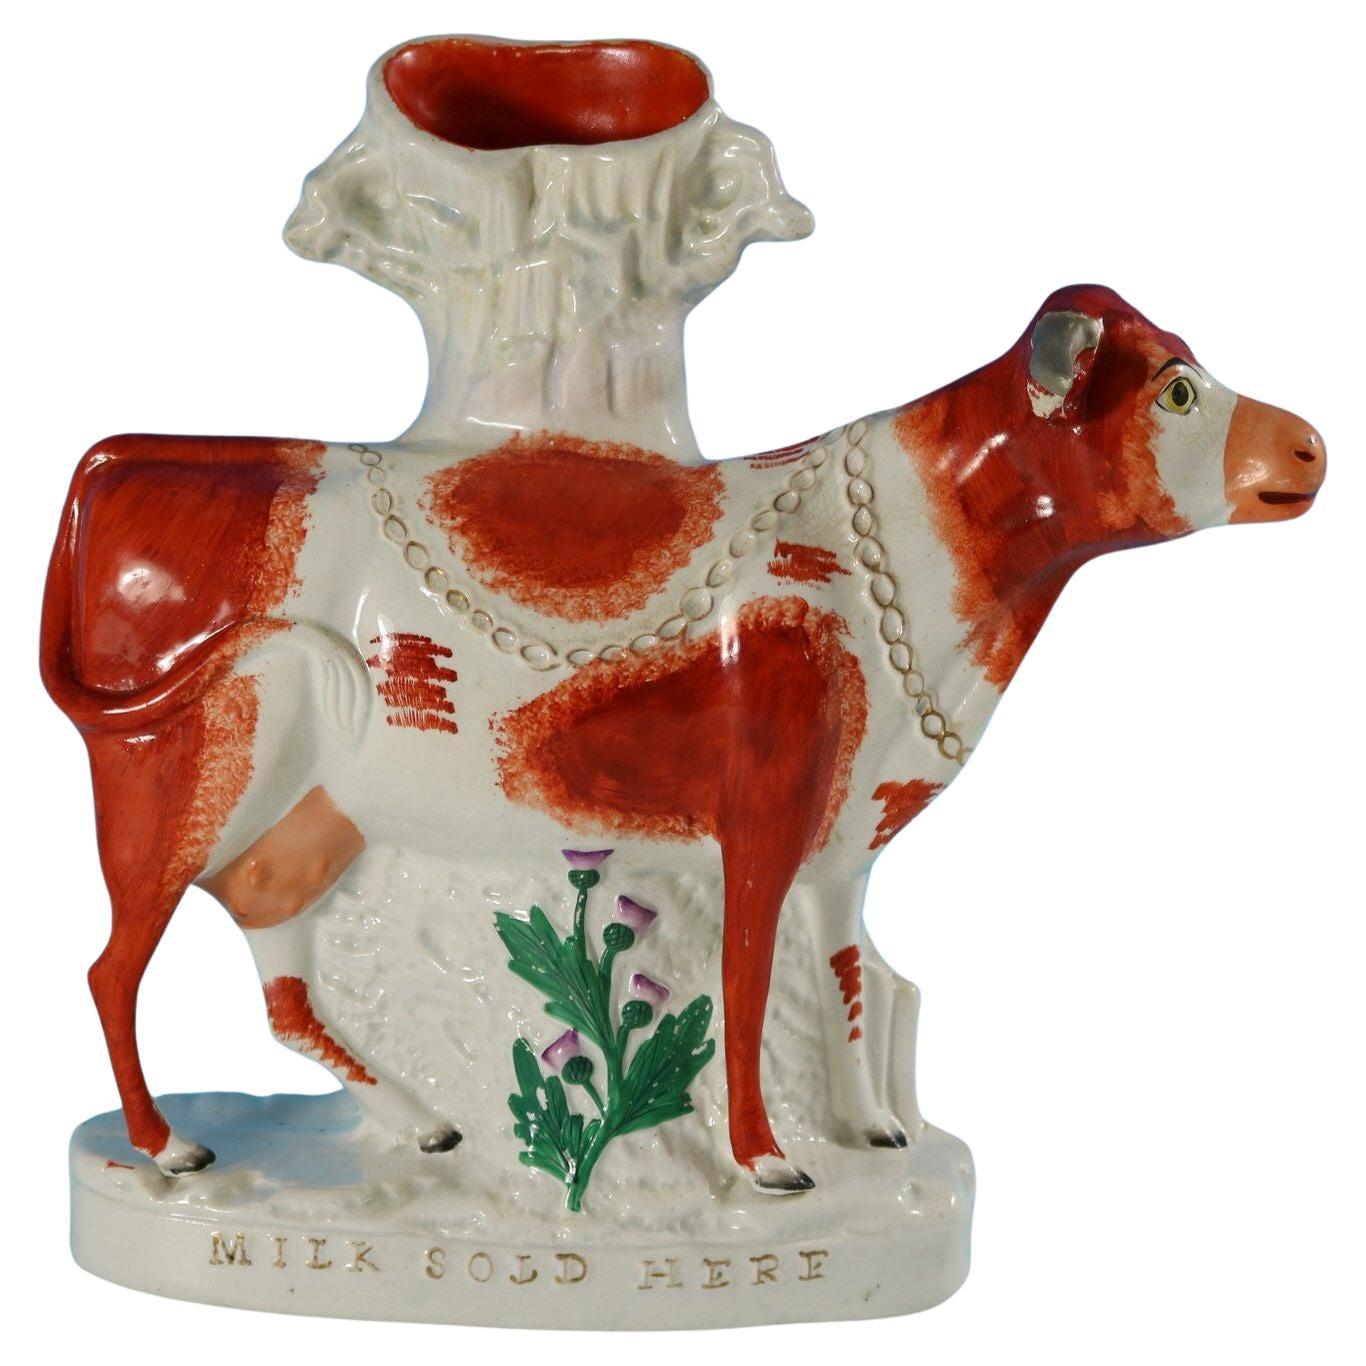 Staffordshire Pottery 'Milk Sold Here' Cow Spill Vase For Sale